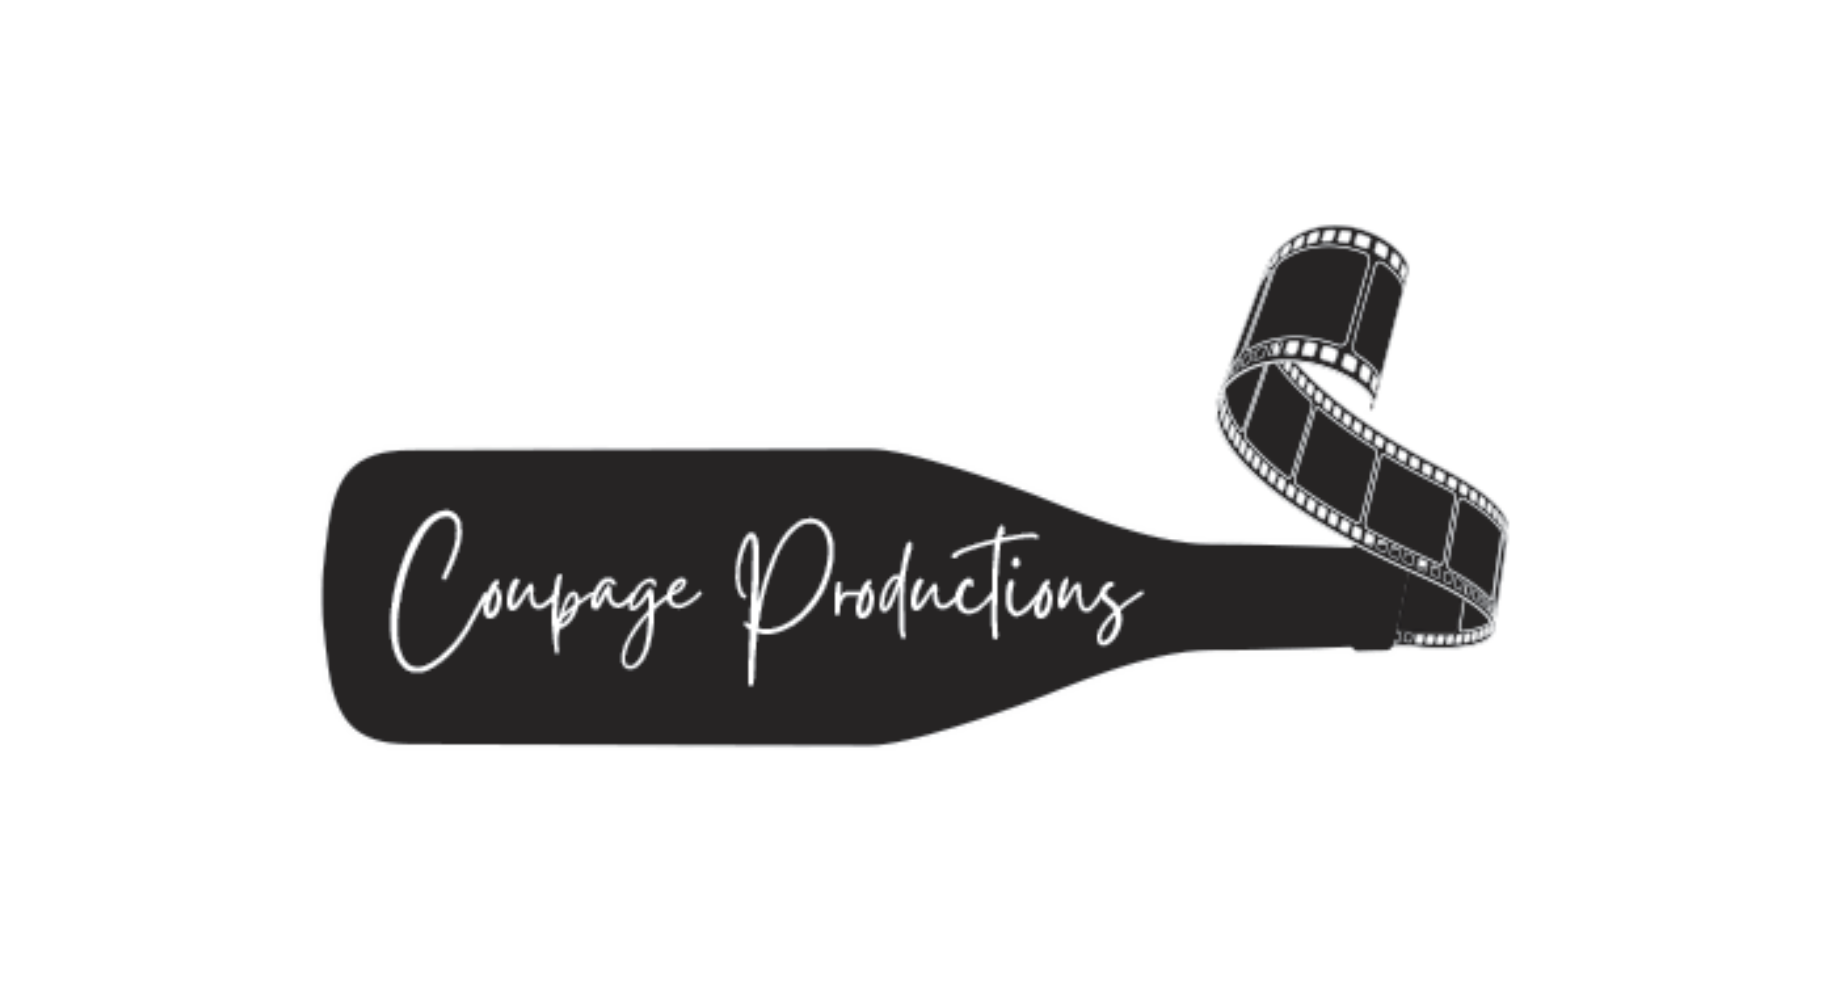 Coupage Productions